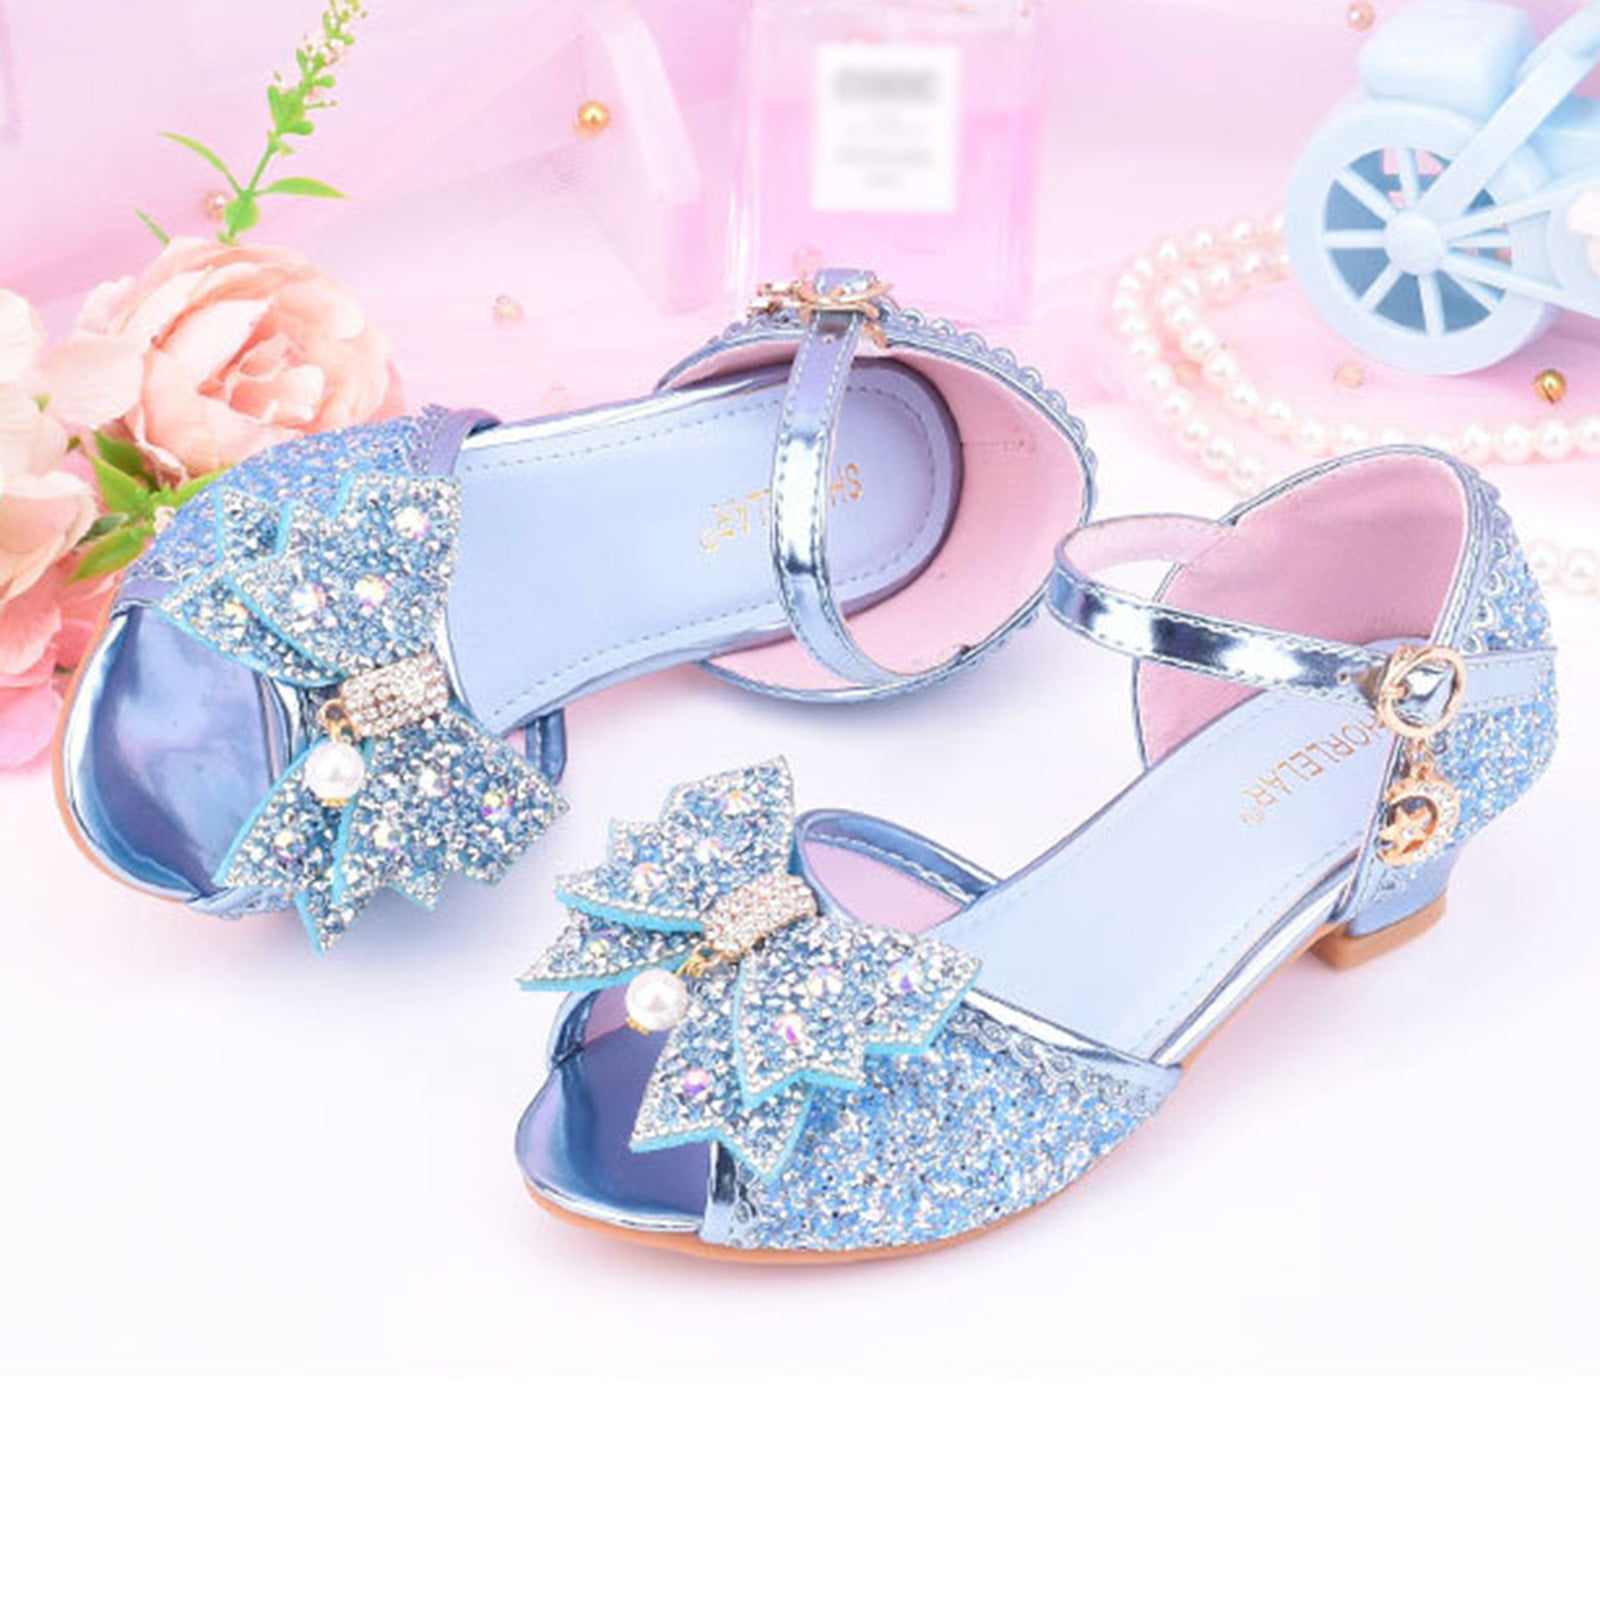 B91xZ Girls' Sandals Children Shoes With Diamond Shiny Sandals Princess  Shoes Bow High Heels Show Princess Toddler Girl Shoes Purple,Size 2